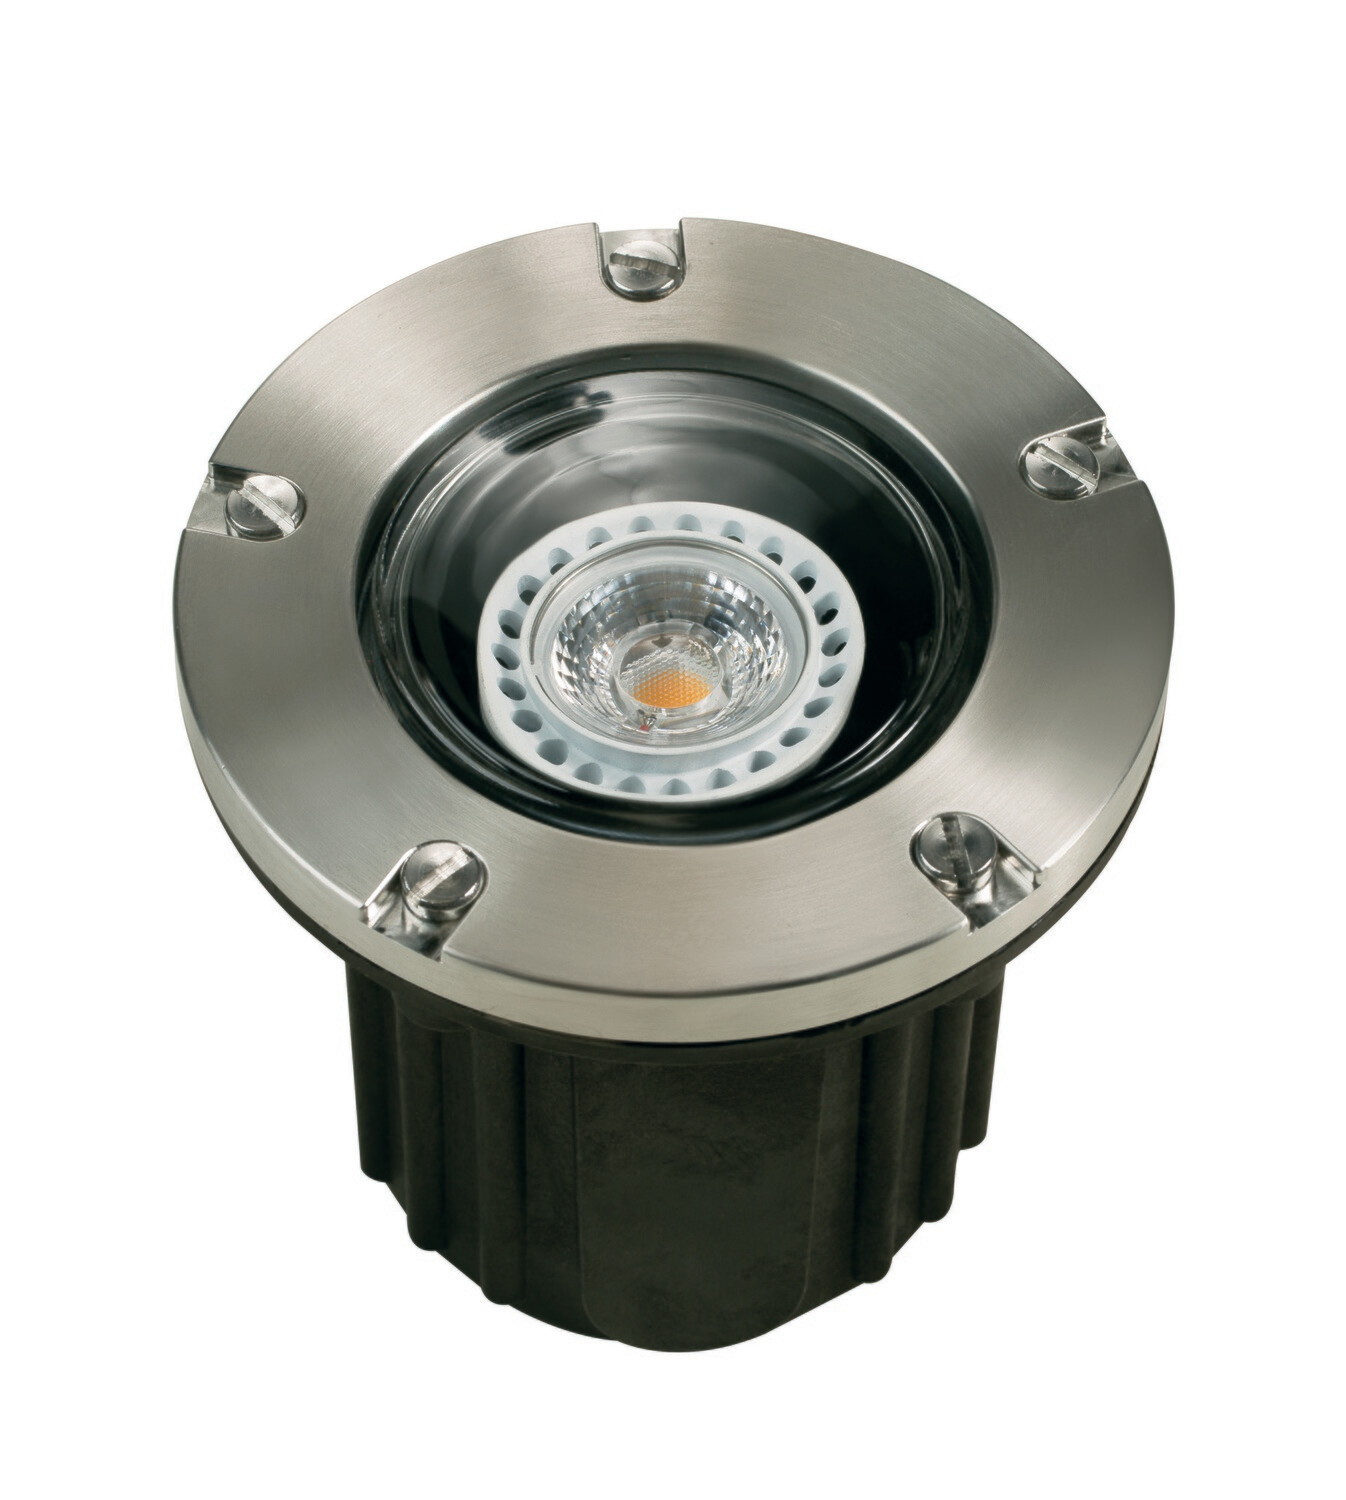 CL-216-SS - Corona MR16 Well Light Stainless Articulating